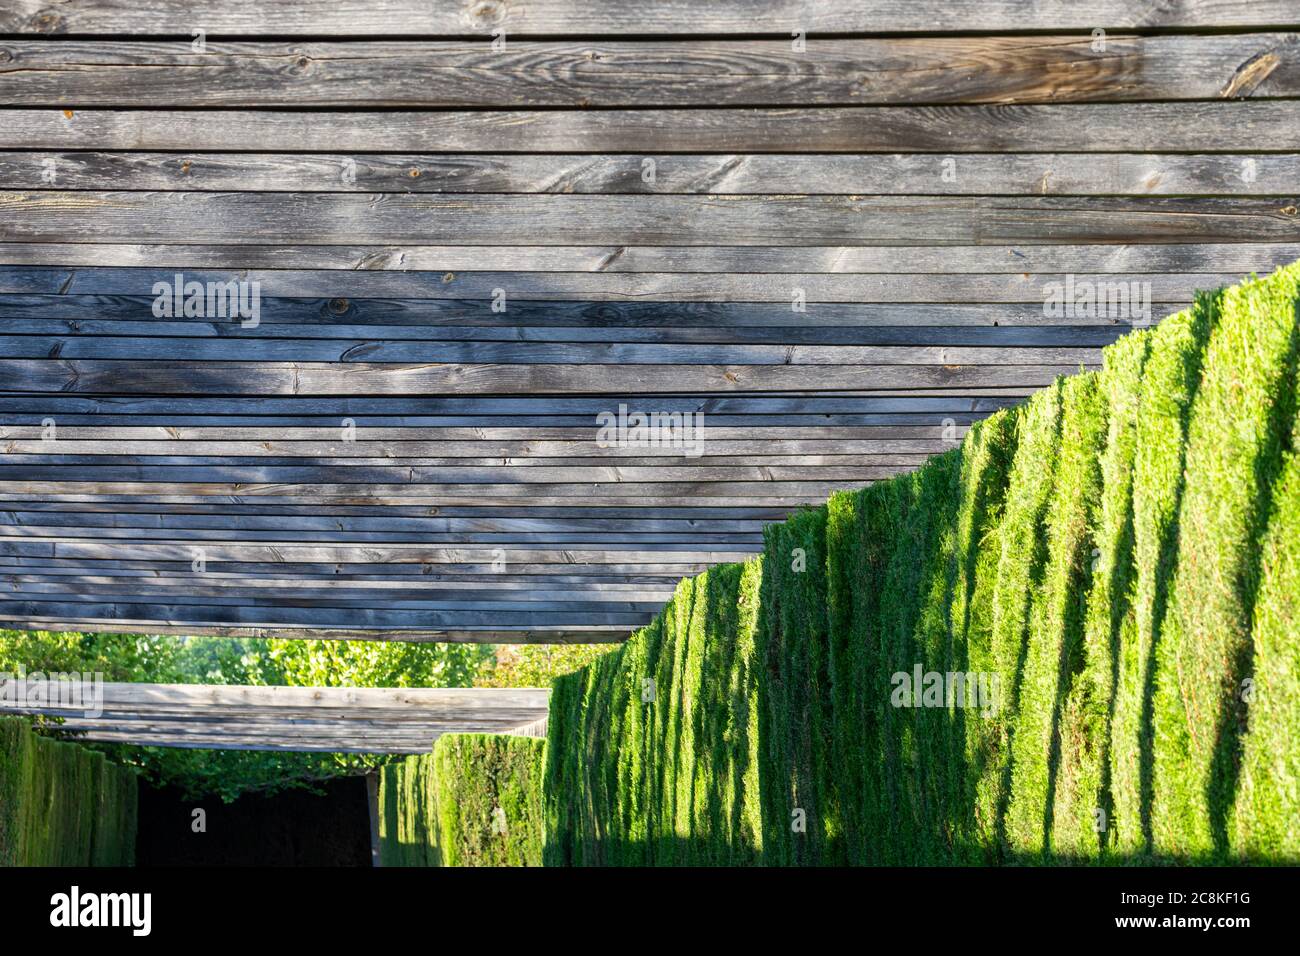 Perspective of a park walk covered with wooden beams and green hedges on the sides Stock Photo